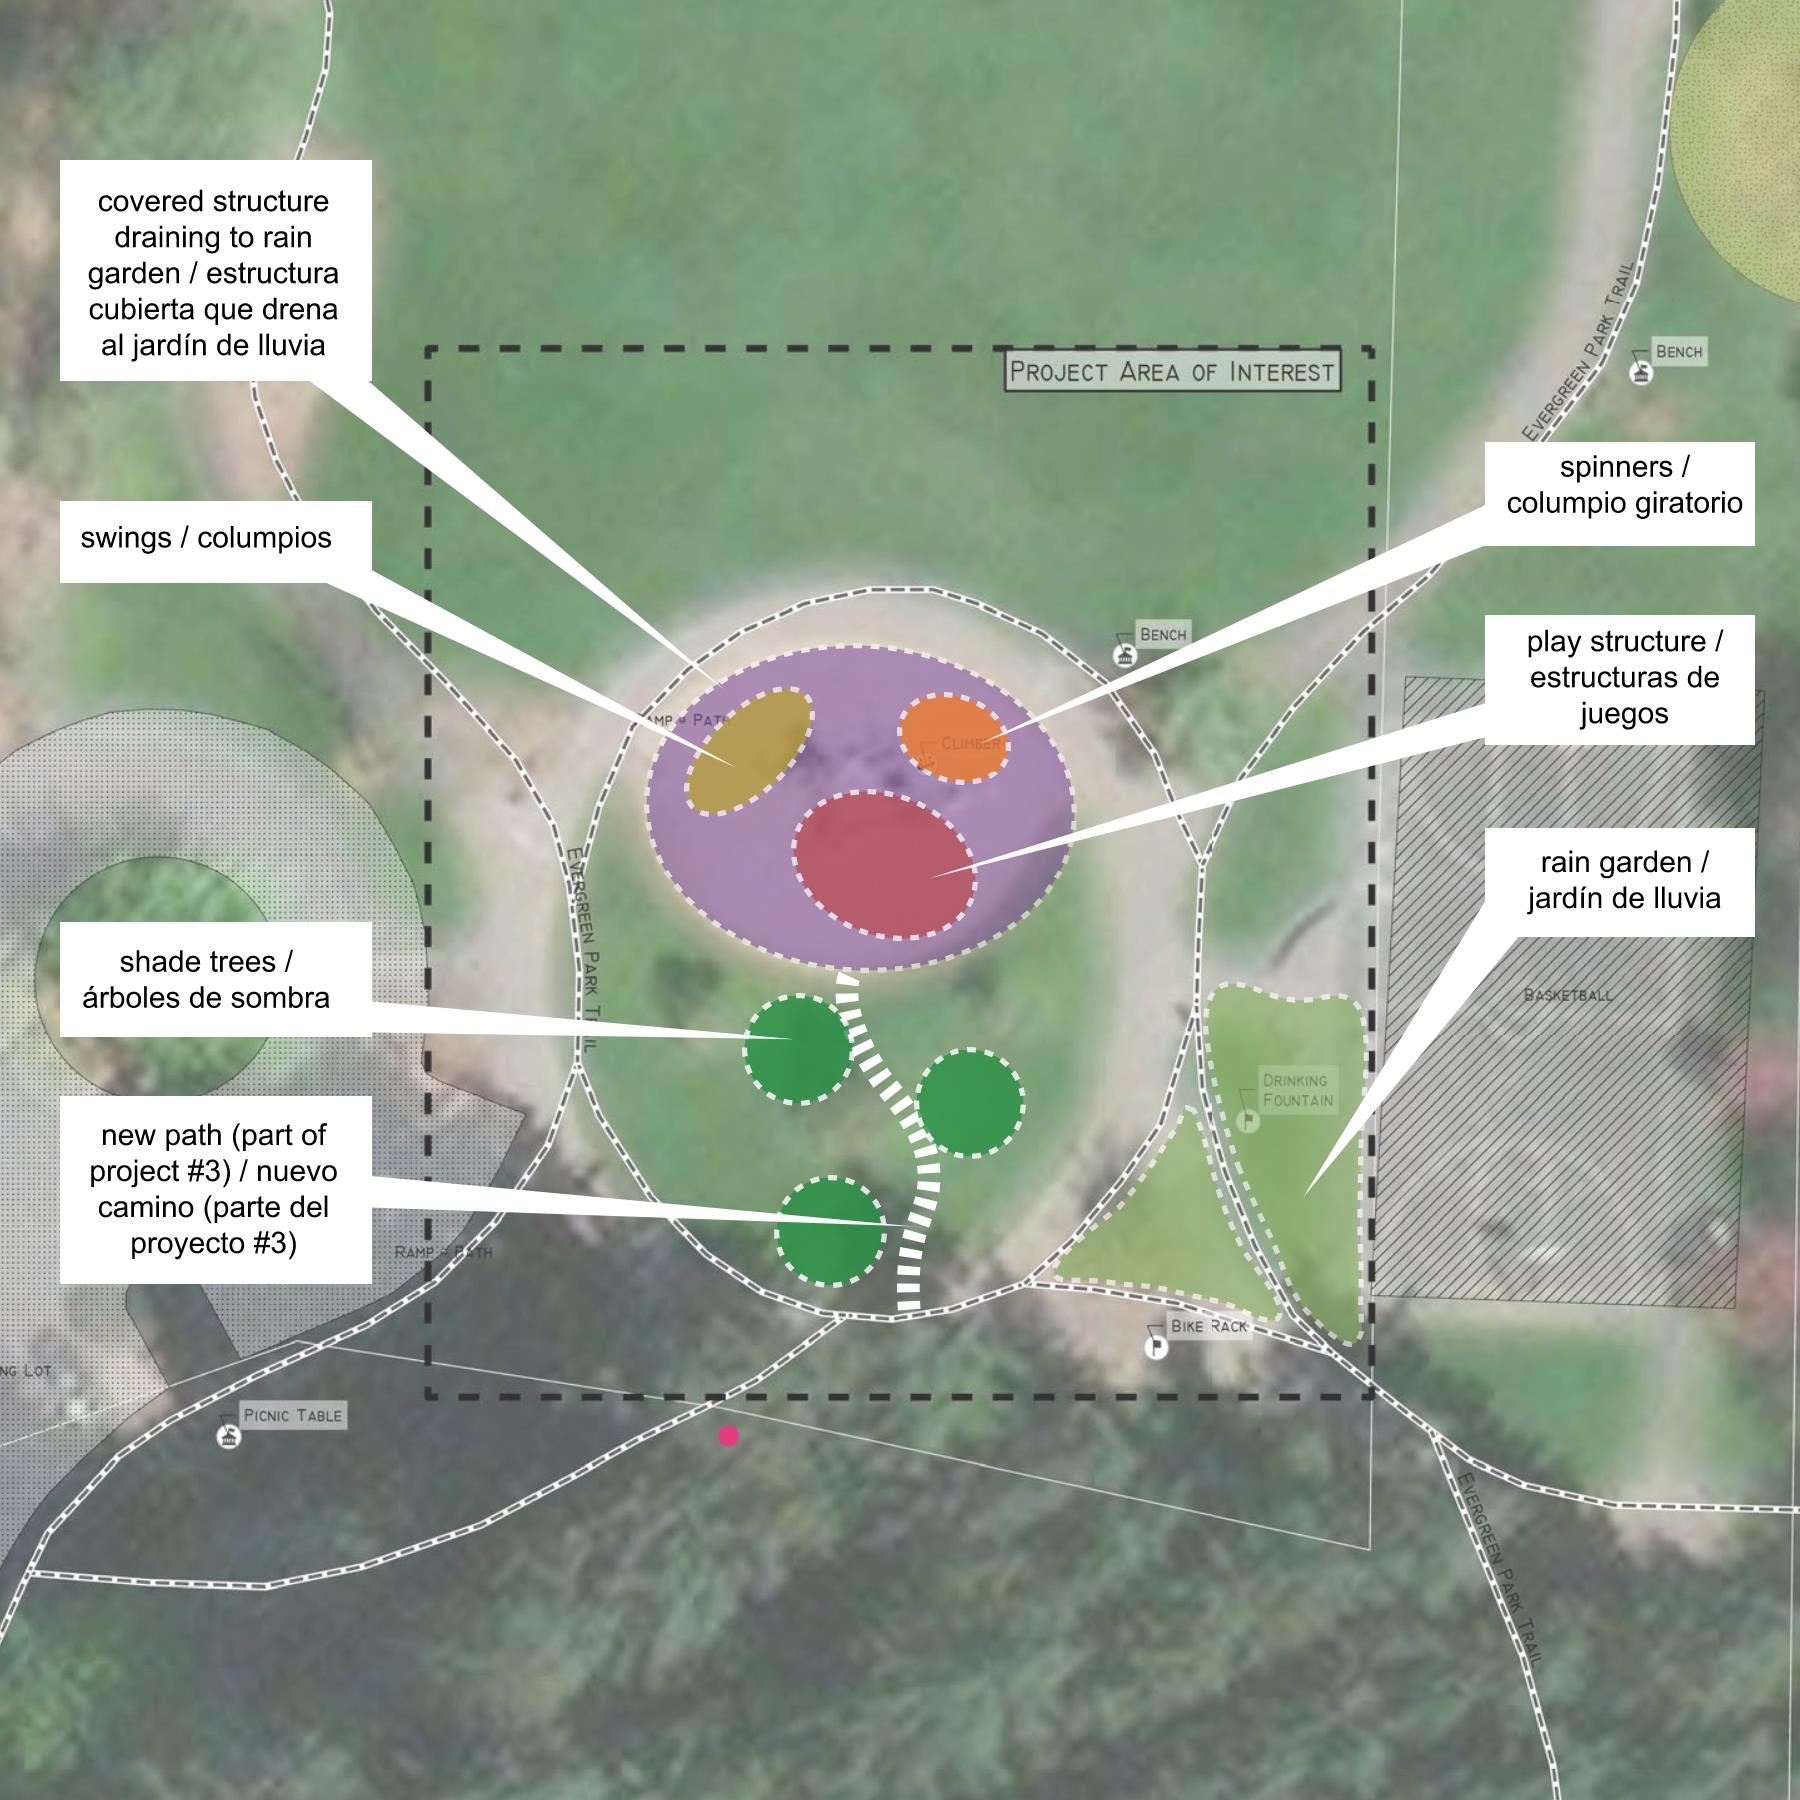 Image alt text: Covered play space is proposed to update the play area in the center of Evergreen park. A covered structure will drain to the rain garden on the south east corner. Swings, spinners, and a play structure will all be sheltered from the elements! Large shade trees and a path connecting to the southern trails will link the updated play area to the rest of the park.